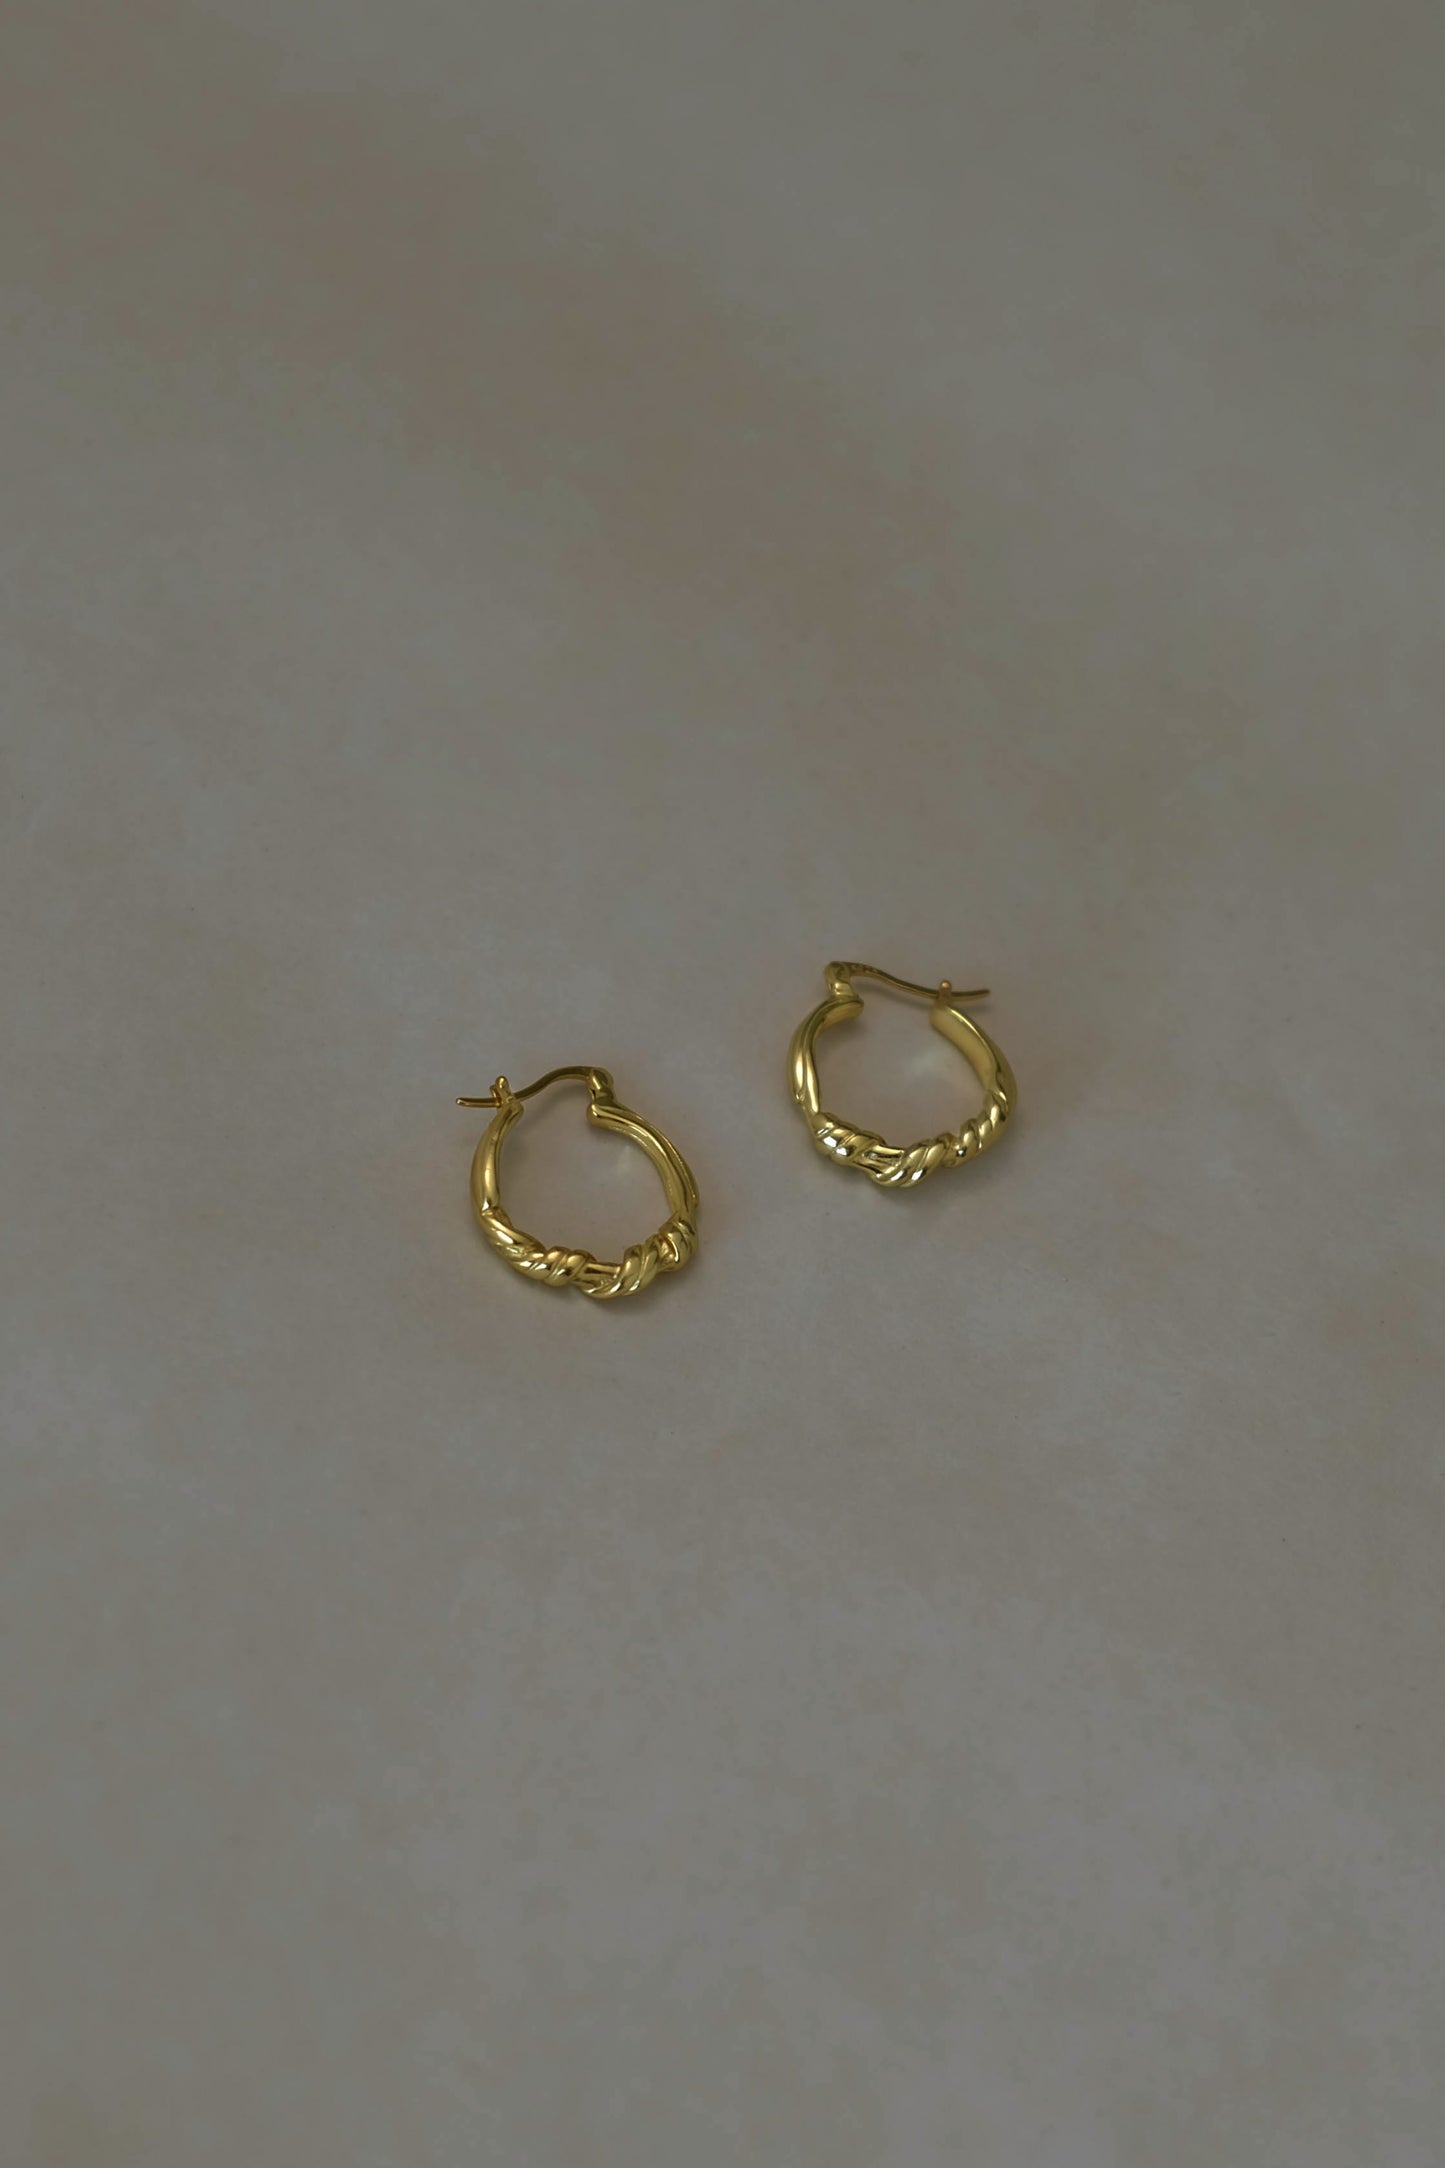 French style knotted earrings in Gold Vermeil